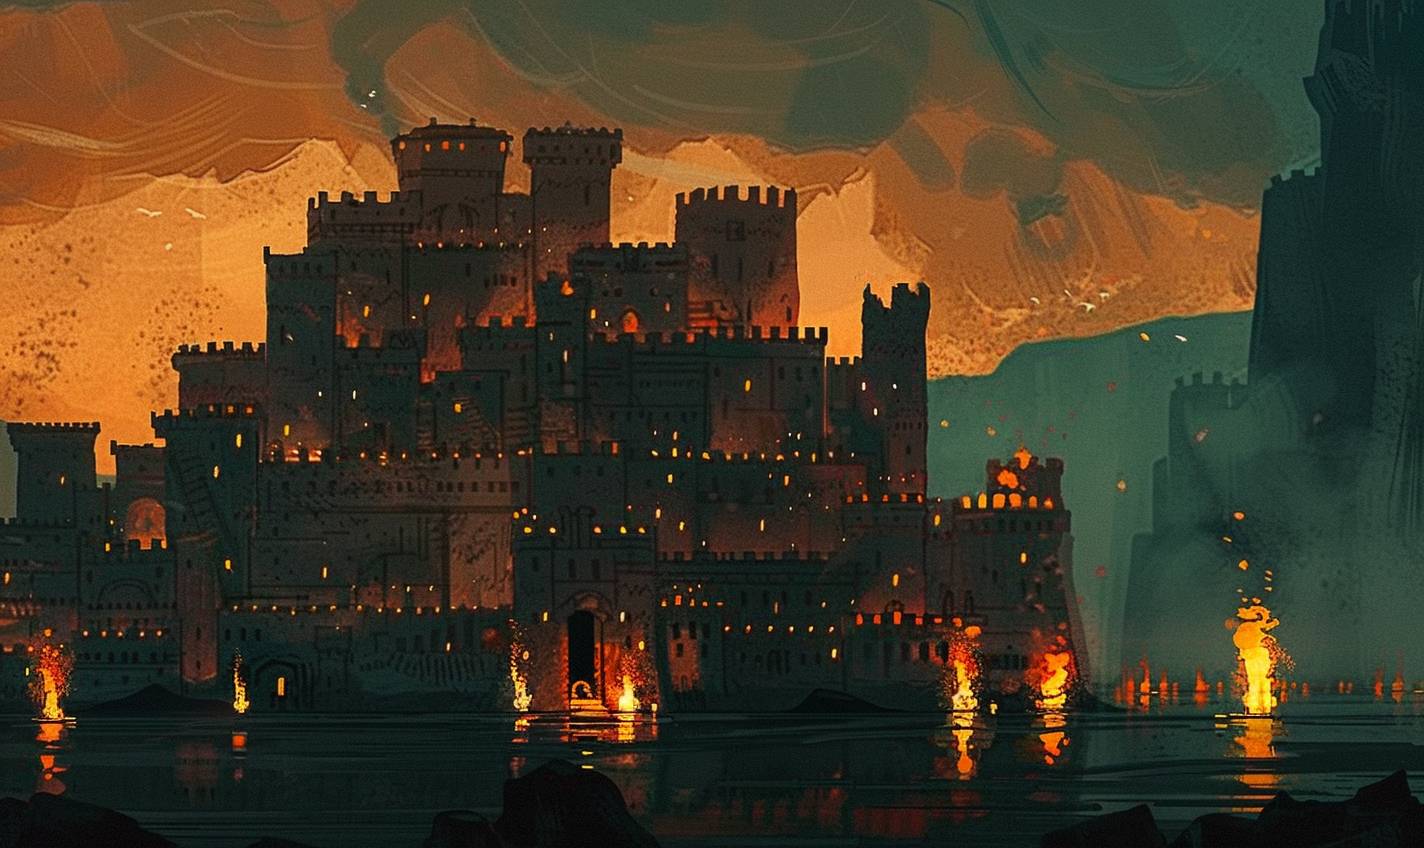 In the style of Jean Jullien, an ancient citadel lit by flickering torches